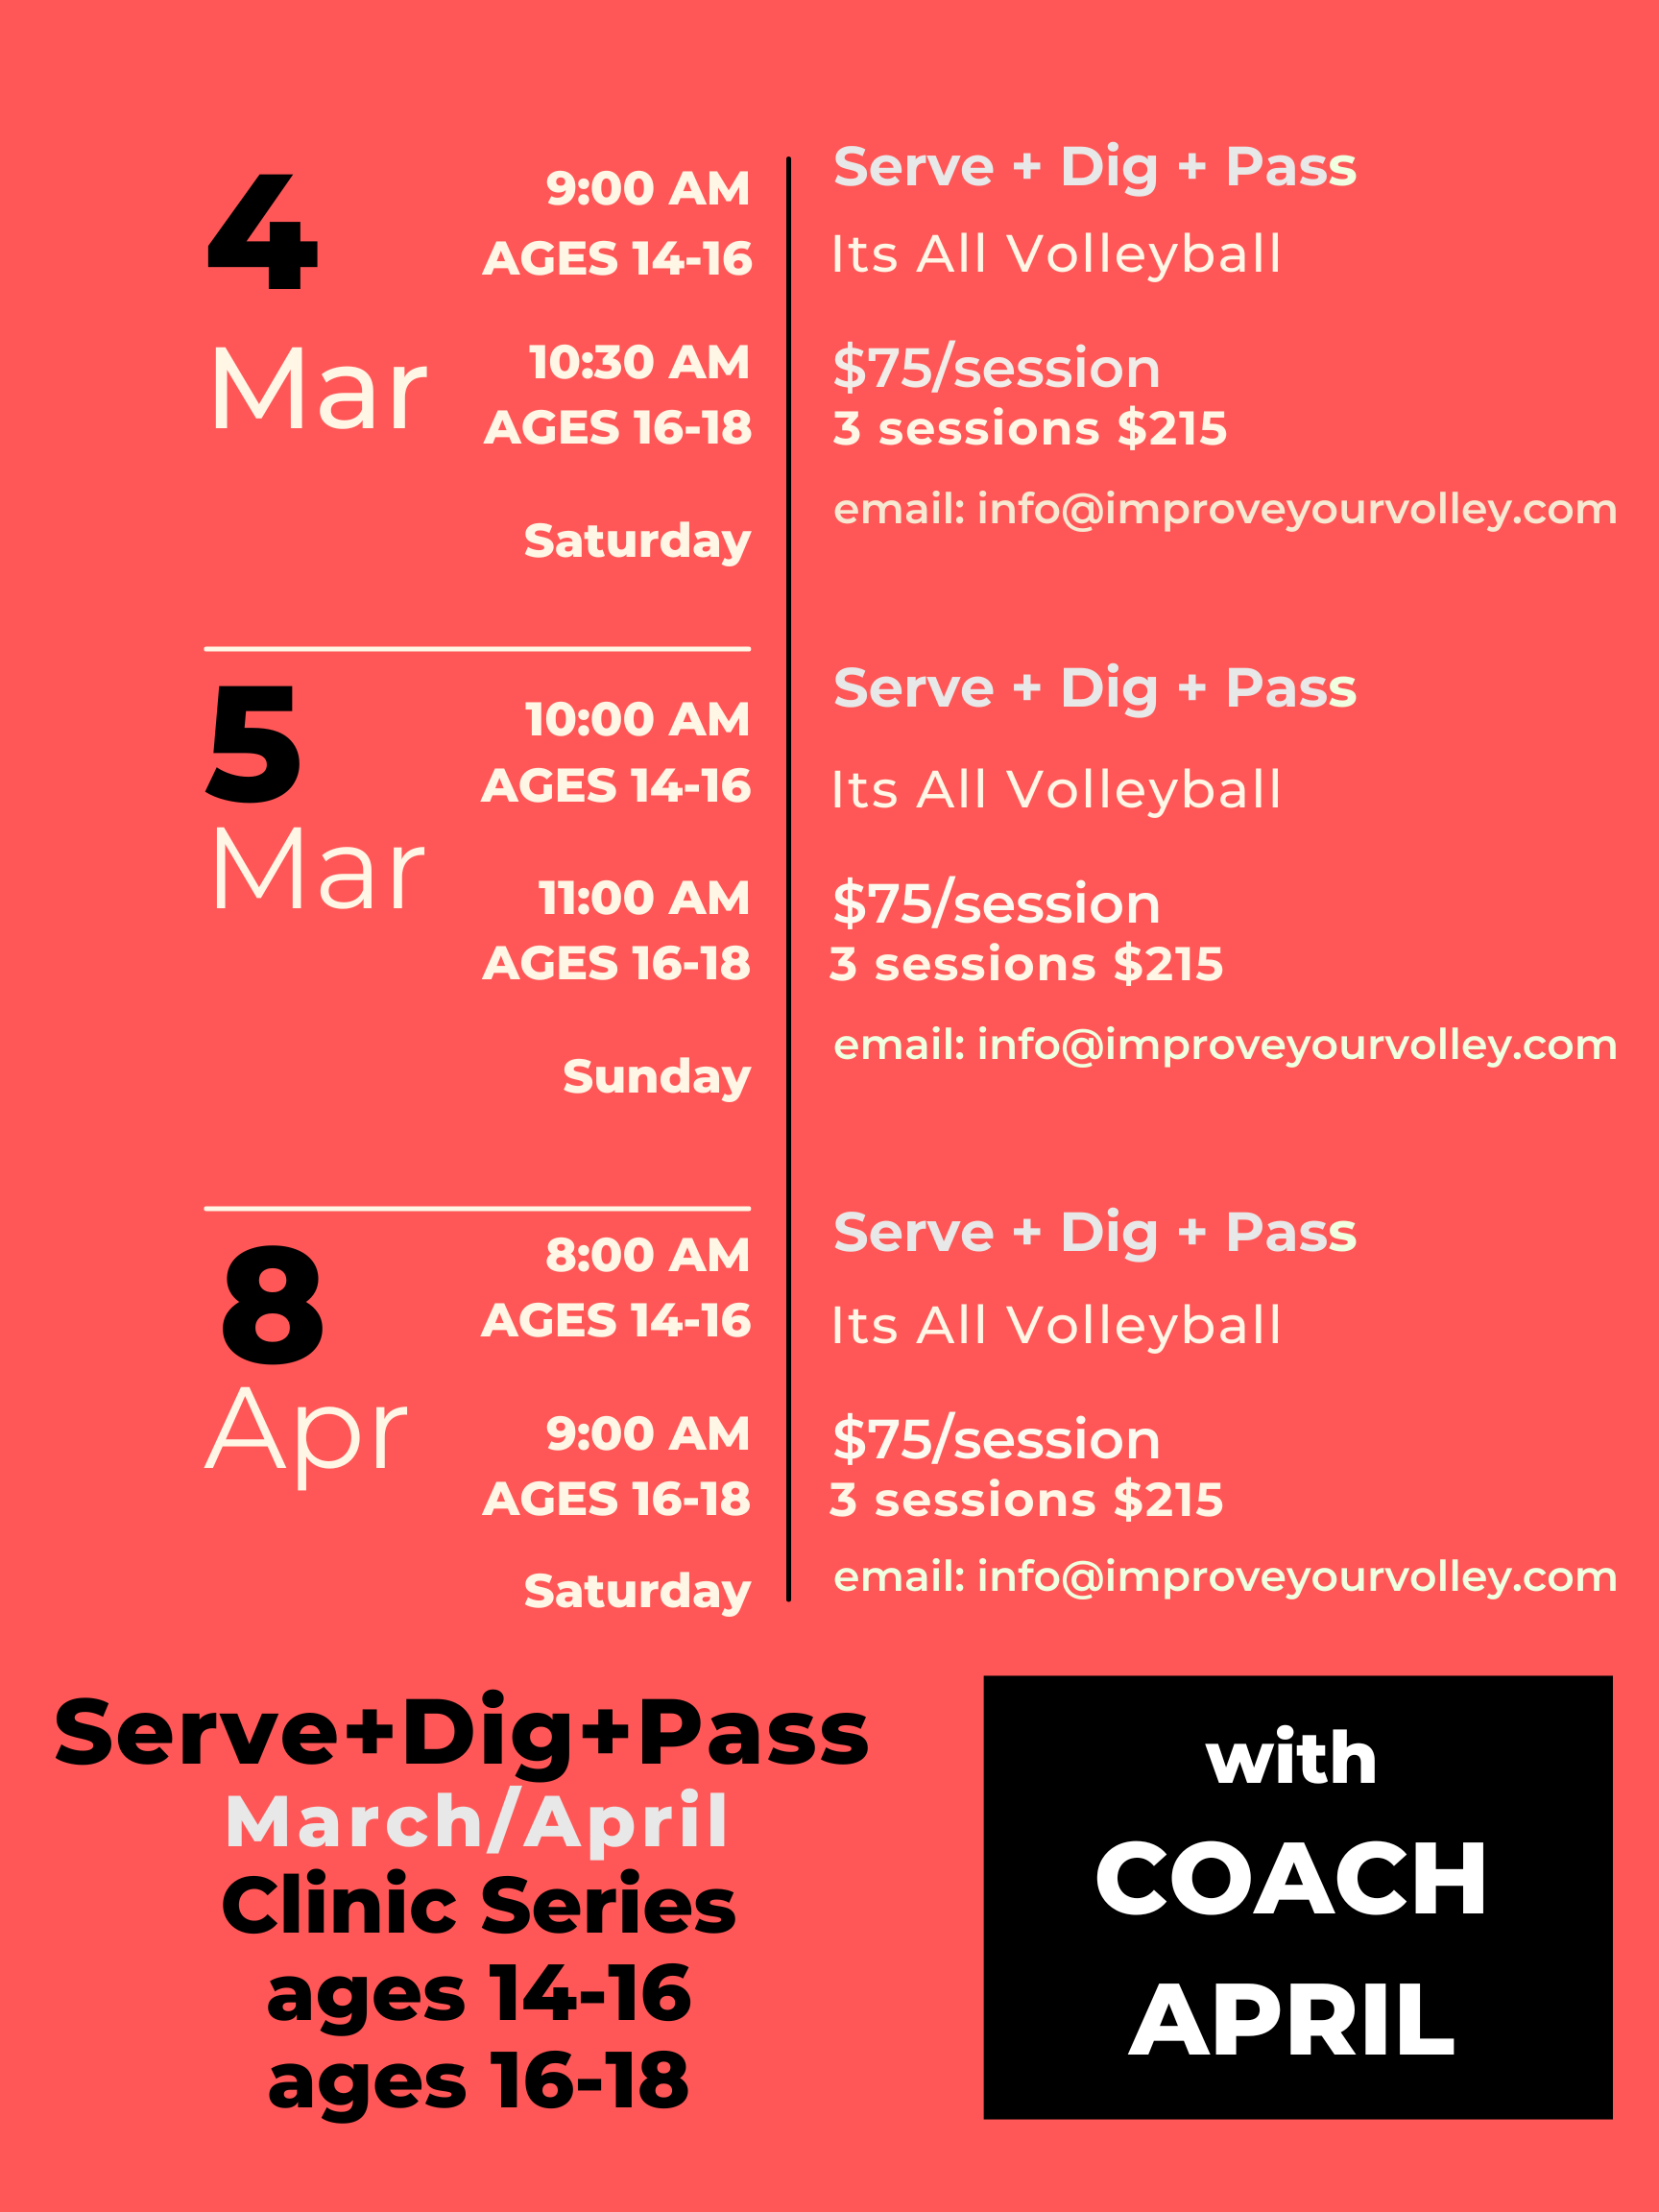 Registration is now open for March/April 2023 Serve+Dig+Pass+Clinic Series hosted by me, Coach April. 
Two (2) one hour sessions on March 4, 5 and April 8. For experienced players with two (2) years experience with ages 14 - 16 and for ages 16 - 18 .
March 4       9am - 10:30am (ages 14 - 16) and 10:30am - 12pm (ages 16 - 18)
March 5       10am - 11am (ages 14 - 16) and 11am - 12pm (ages 16 - 18)
April 8          8am - 9am (ages 14 - 16) and 9am - 10pm (ages 16 - 18)

Limited spaces available. Spots will sell out. Email info@improveyourolley.com for more information and to reserve your spot..